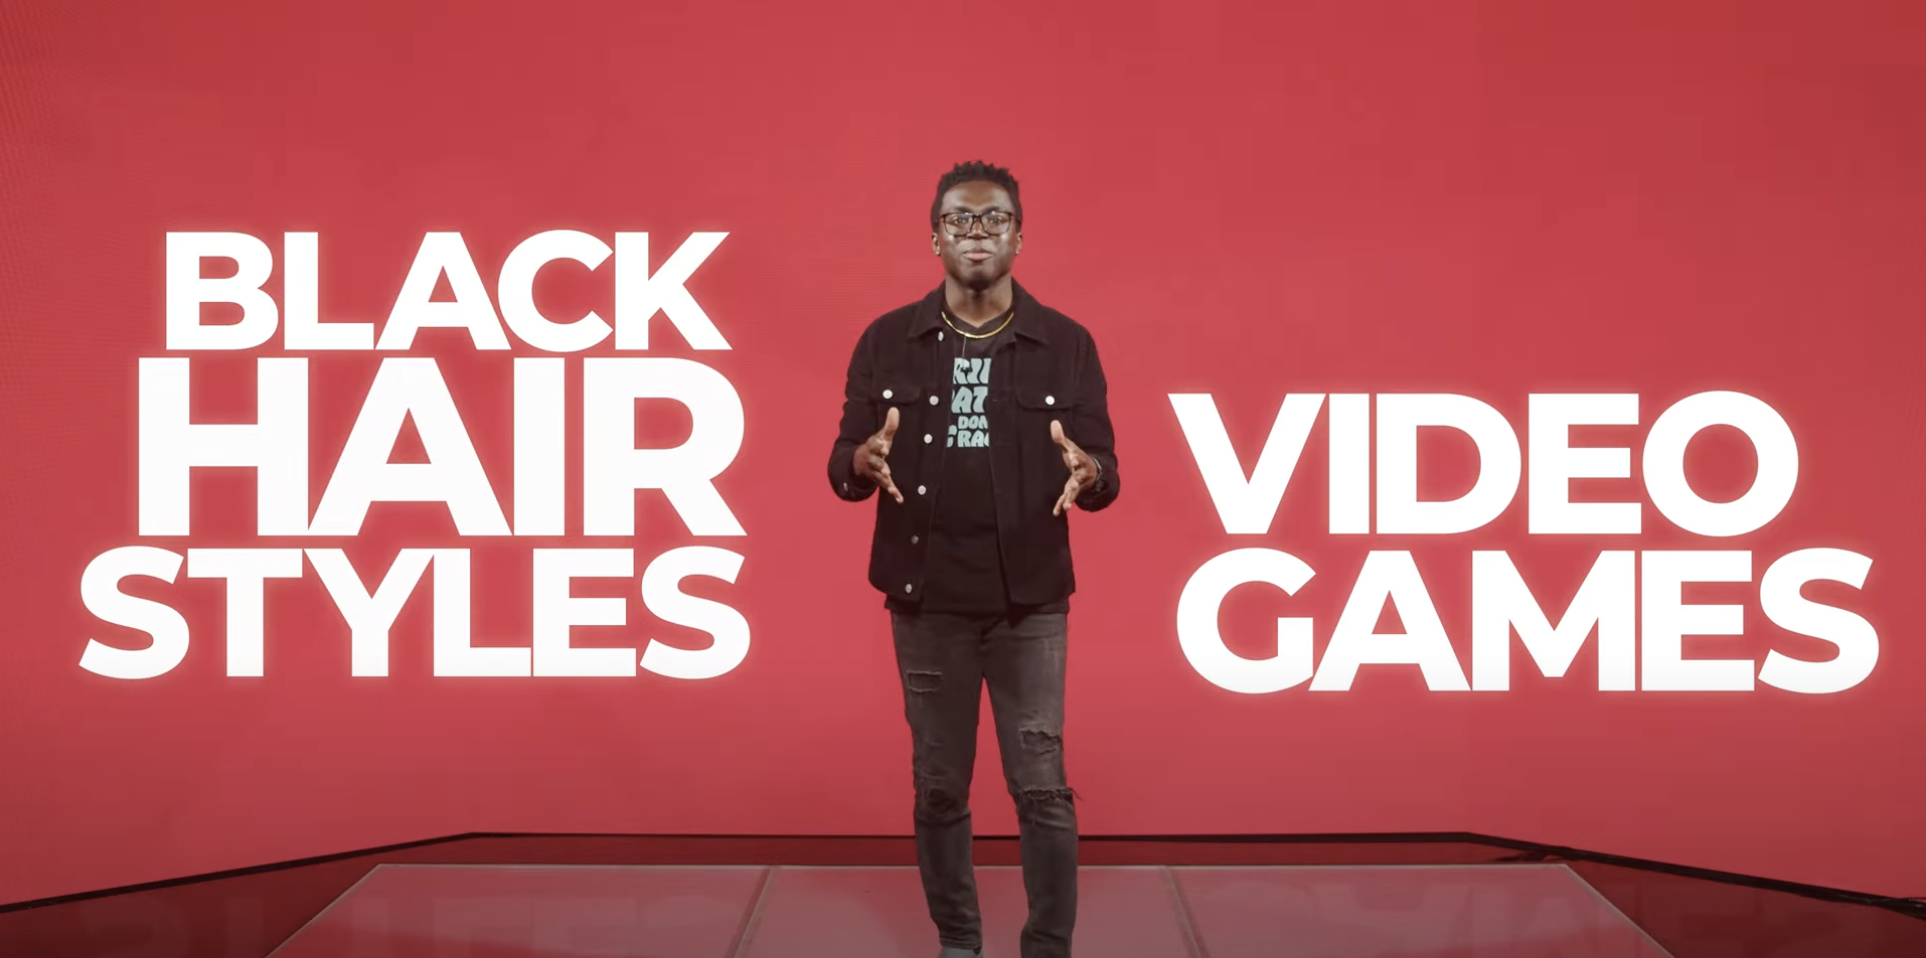 Black Hairstyles In Video Games Is Still A Significant Issue 